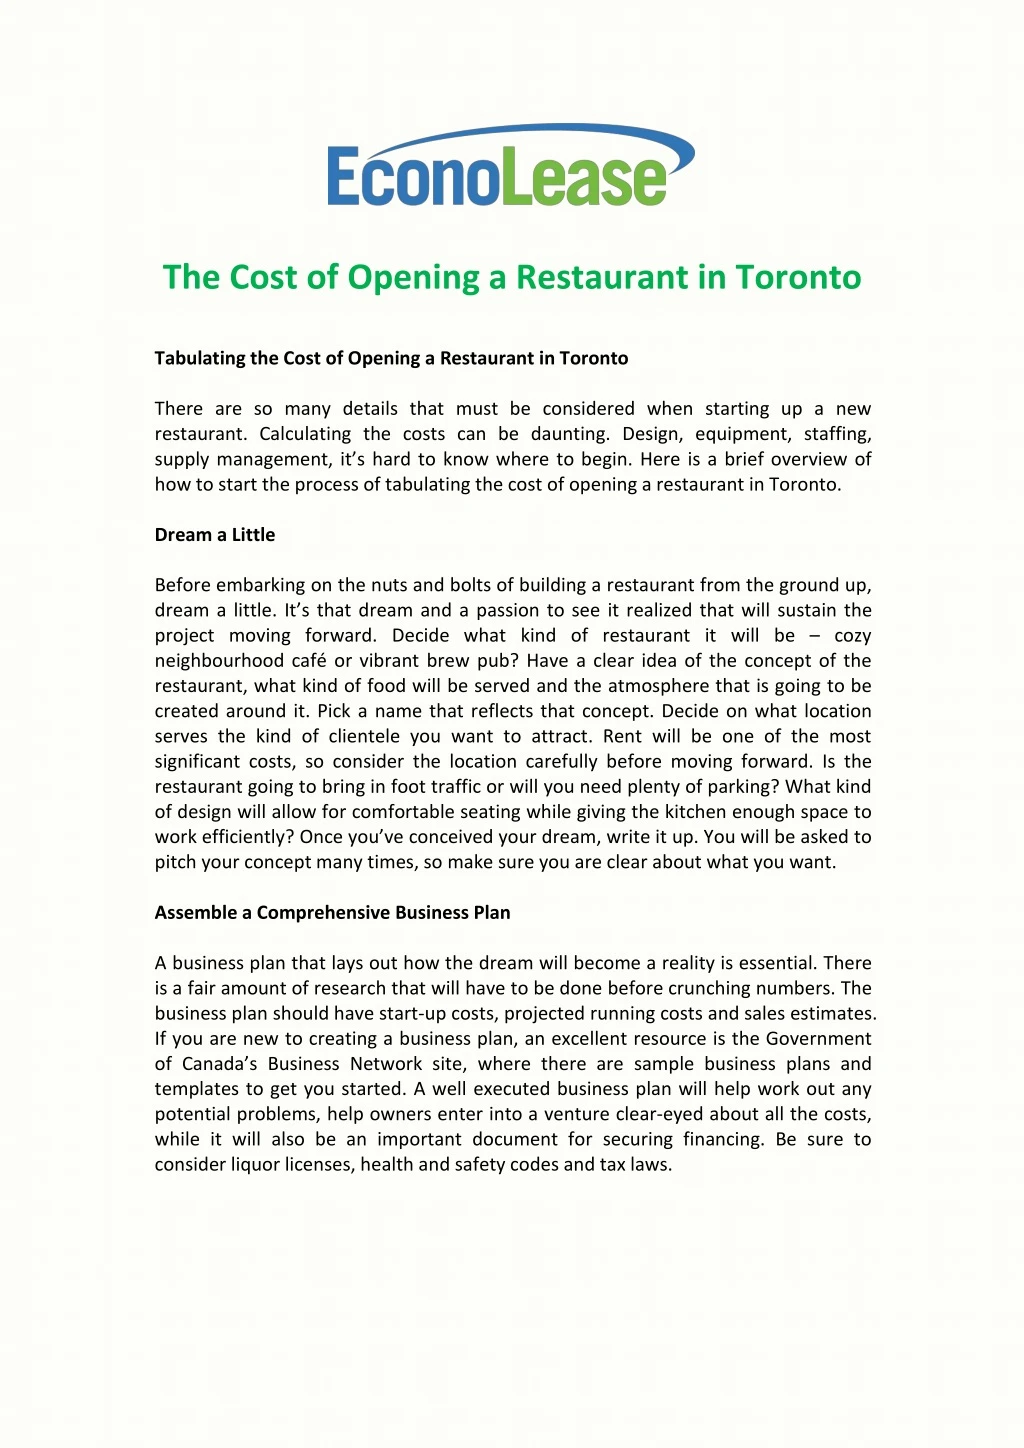 the cost of opening a restaurant in toronto